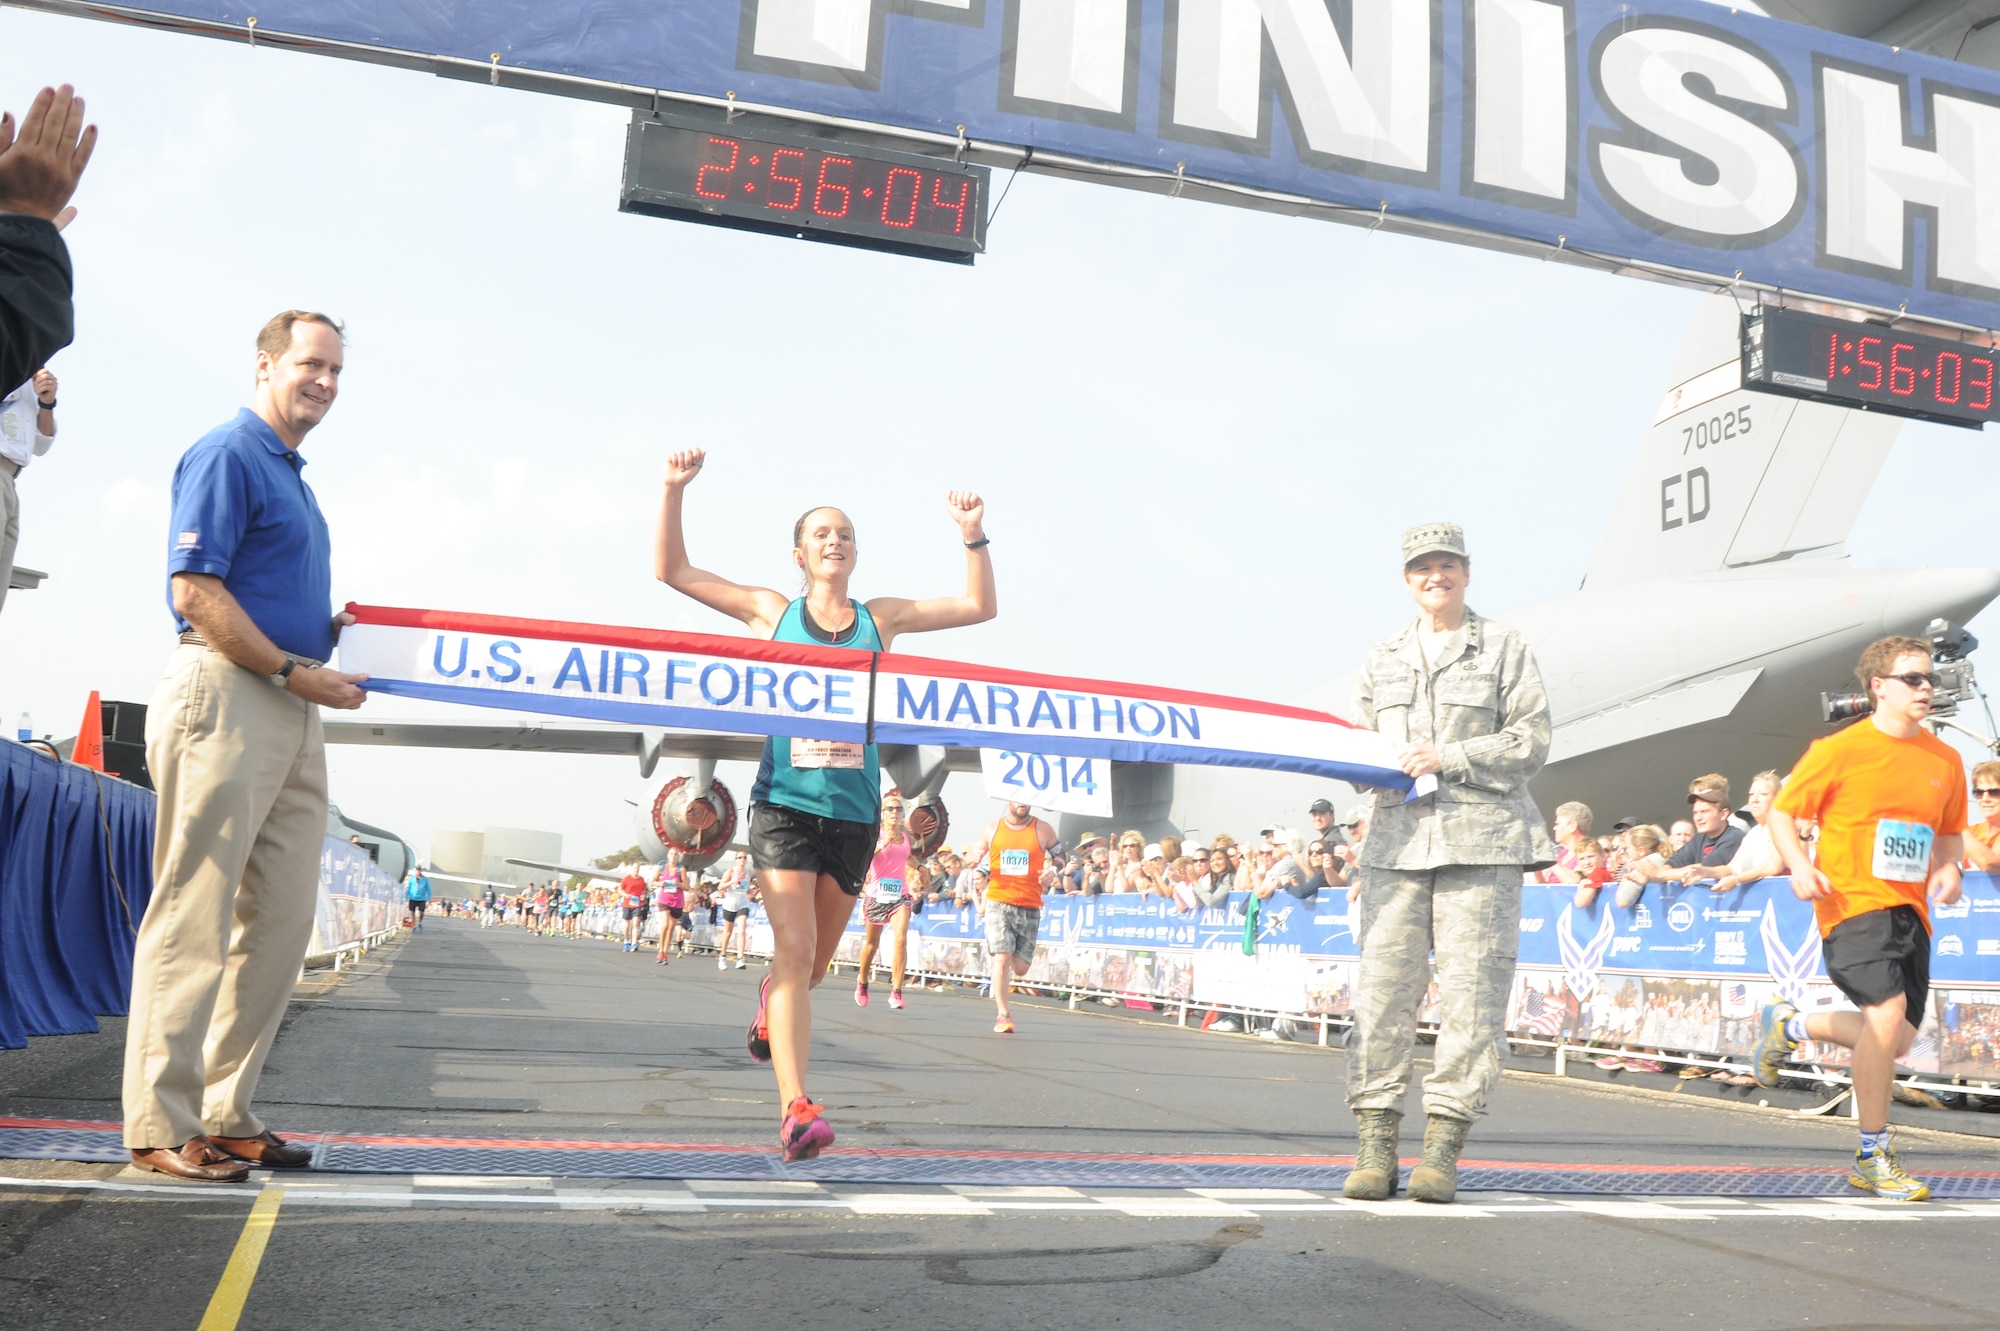 Nicoloa Holdsworth crosses the finish line and is the winner of the 2014 U.S. Air Force Marathon’s women’s full marathon Sept. 20, 2014, at Wright-Patterson Air Force Base, Ohio. This was Holdworth’s first marathon win. (U.S. Air Force photo/Wes Farnsworth)